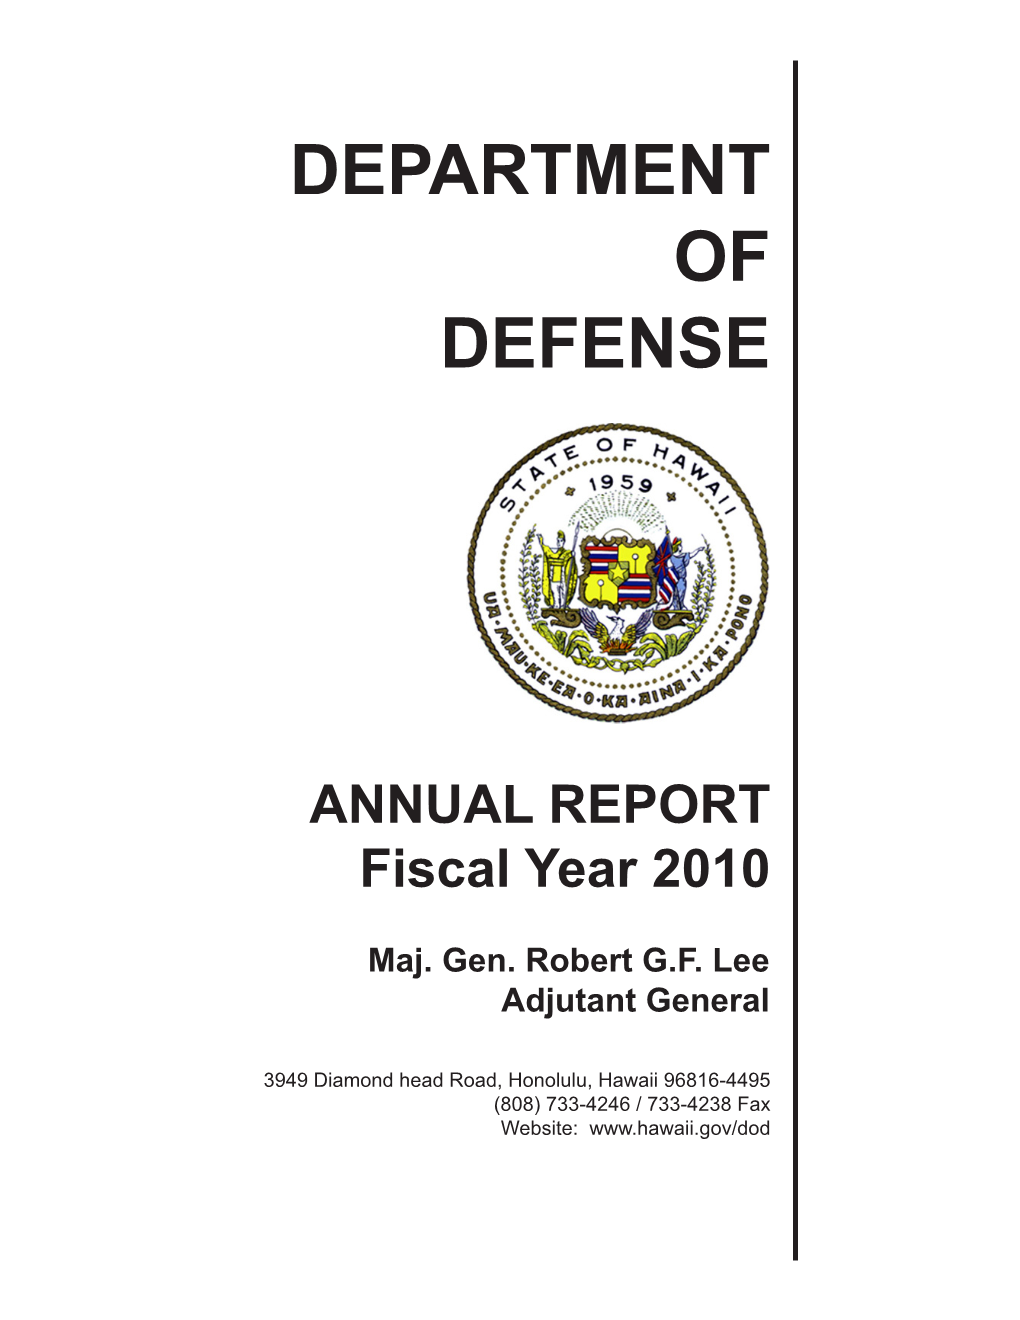 ANNUAL REPORT Fiscal Year 2010